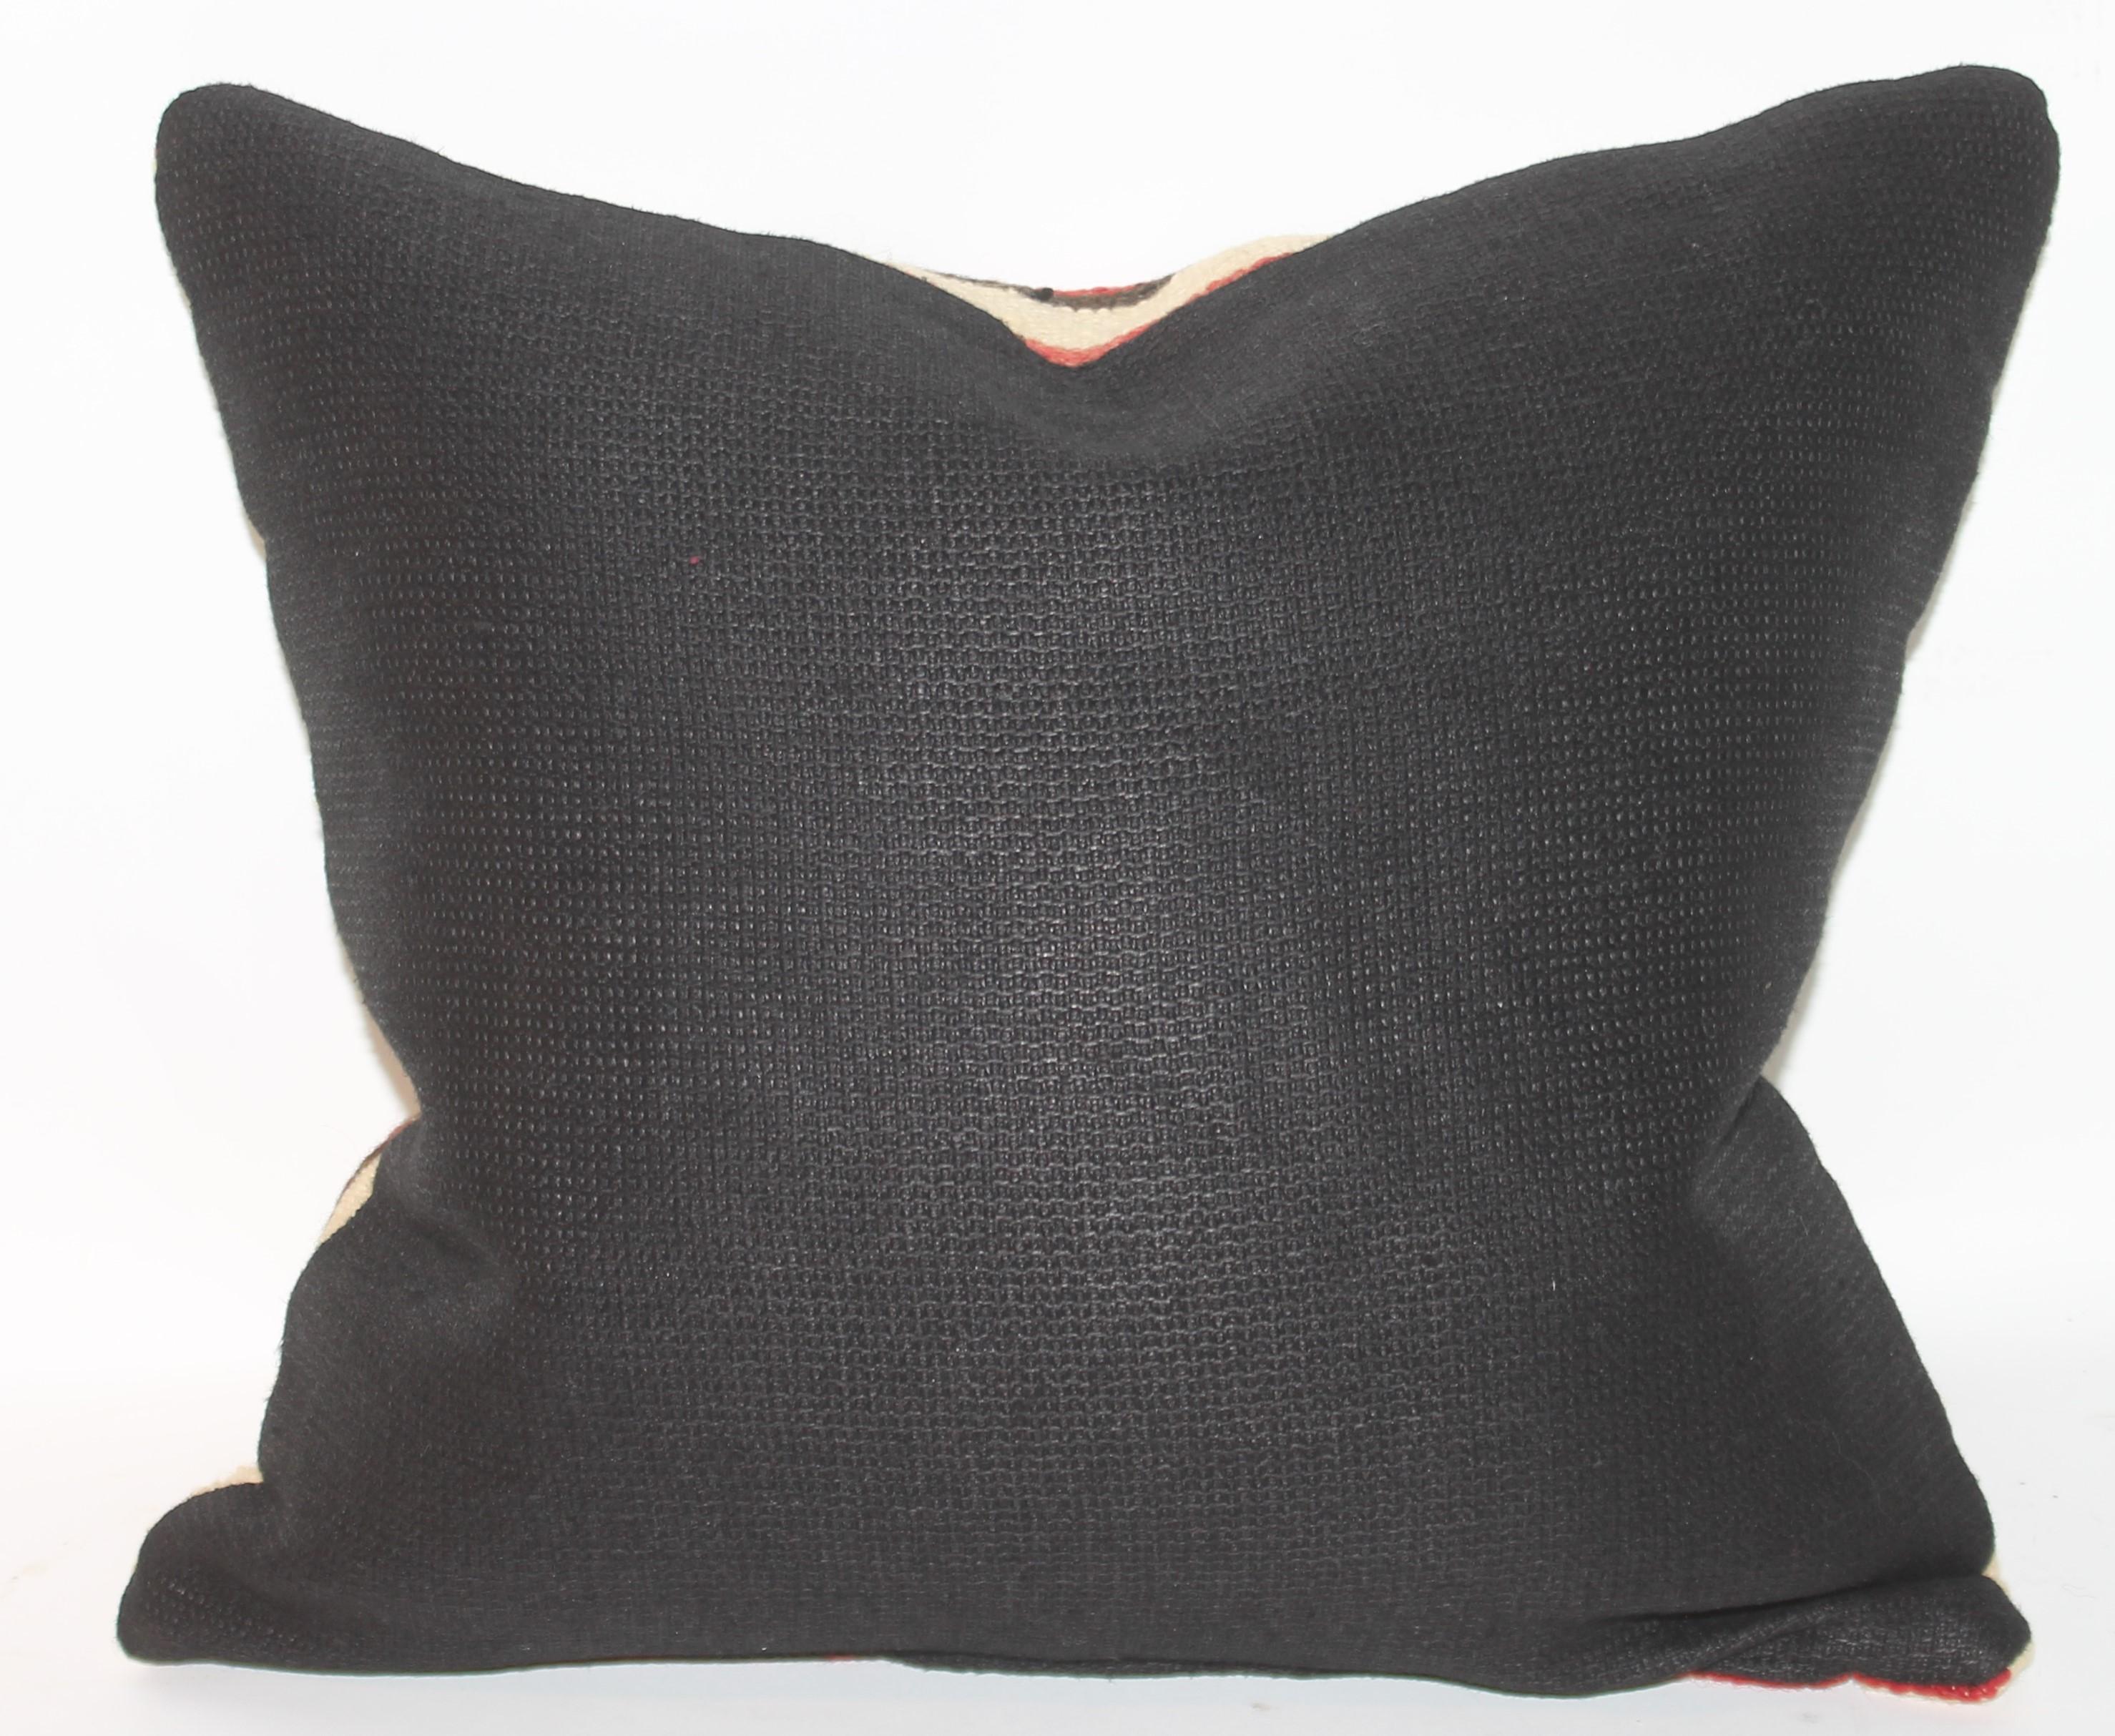 This geometric Navajo Indian weaving pillow is in good condition. The backing is in a dark black cotton linen.